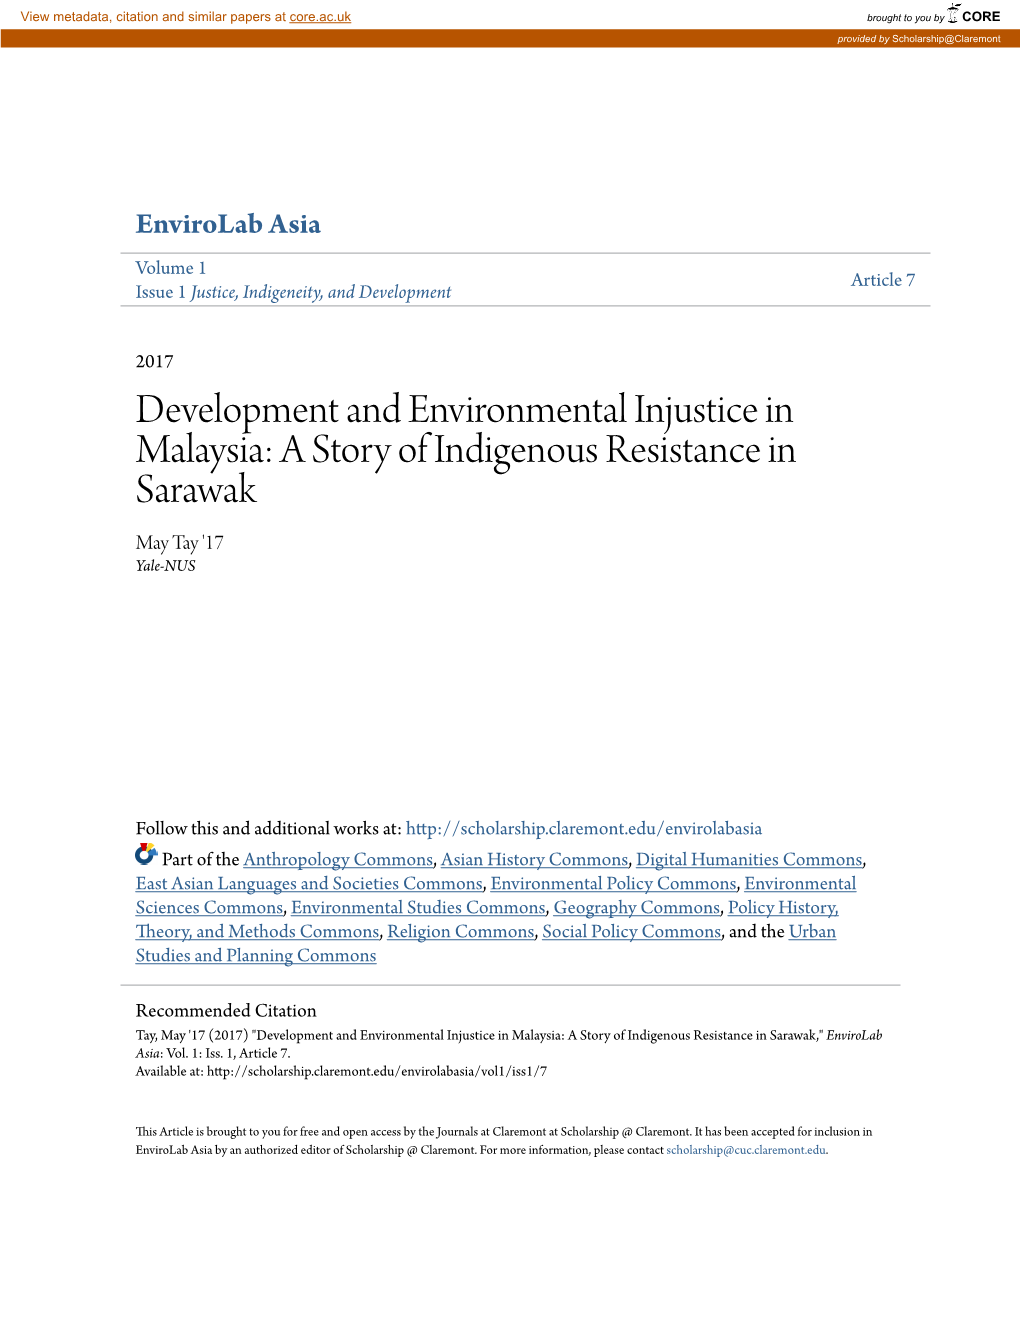 Development and Environmental Injustice in Malaysia: a Story of Indigenous Resistance in Sarawak May Tay '17 Yale-NUS